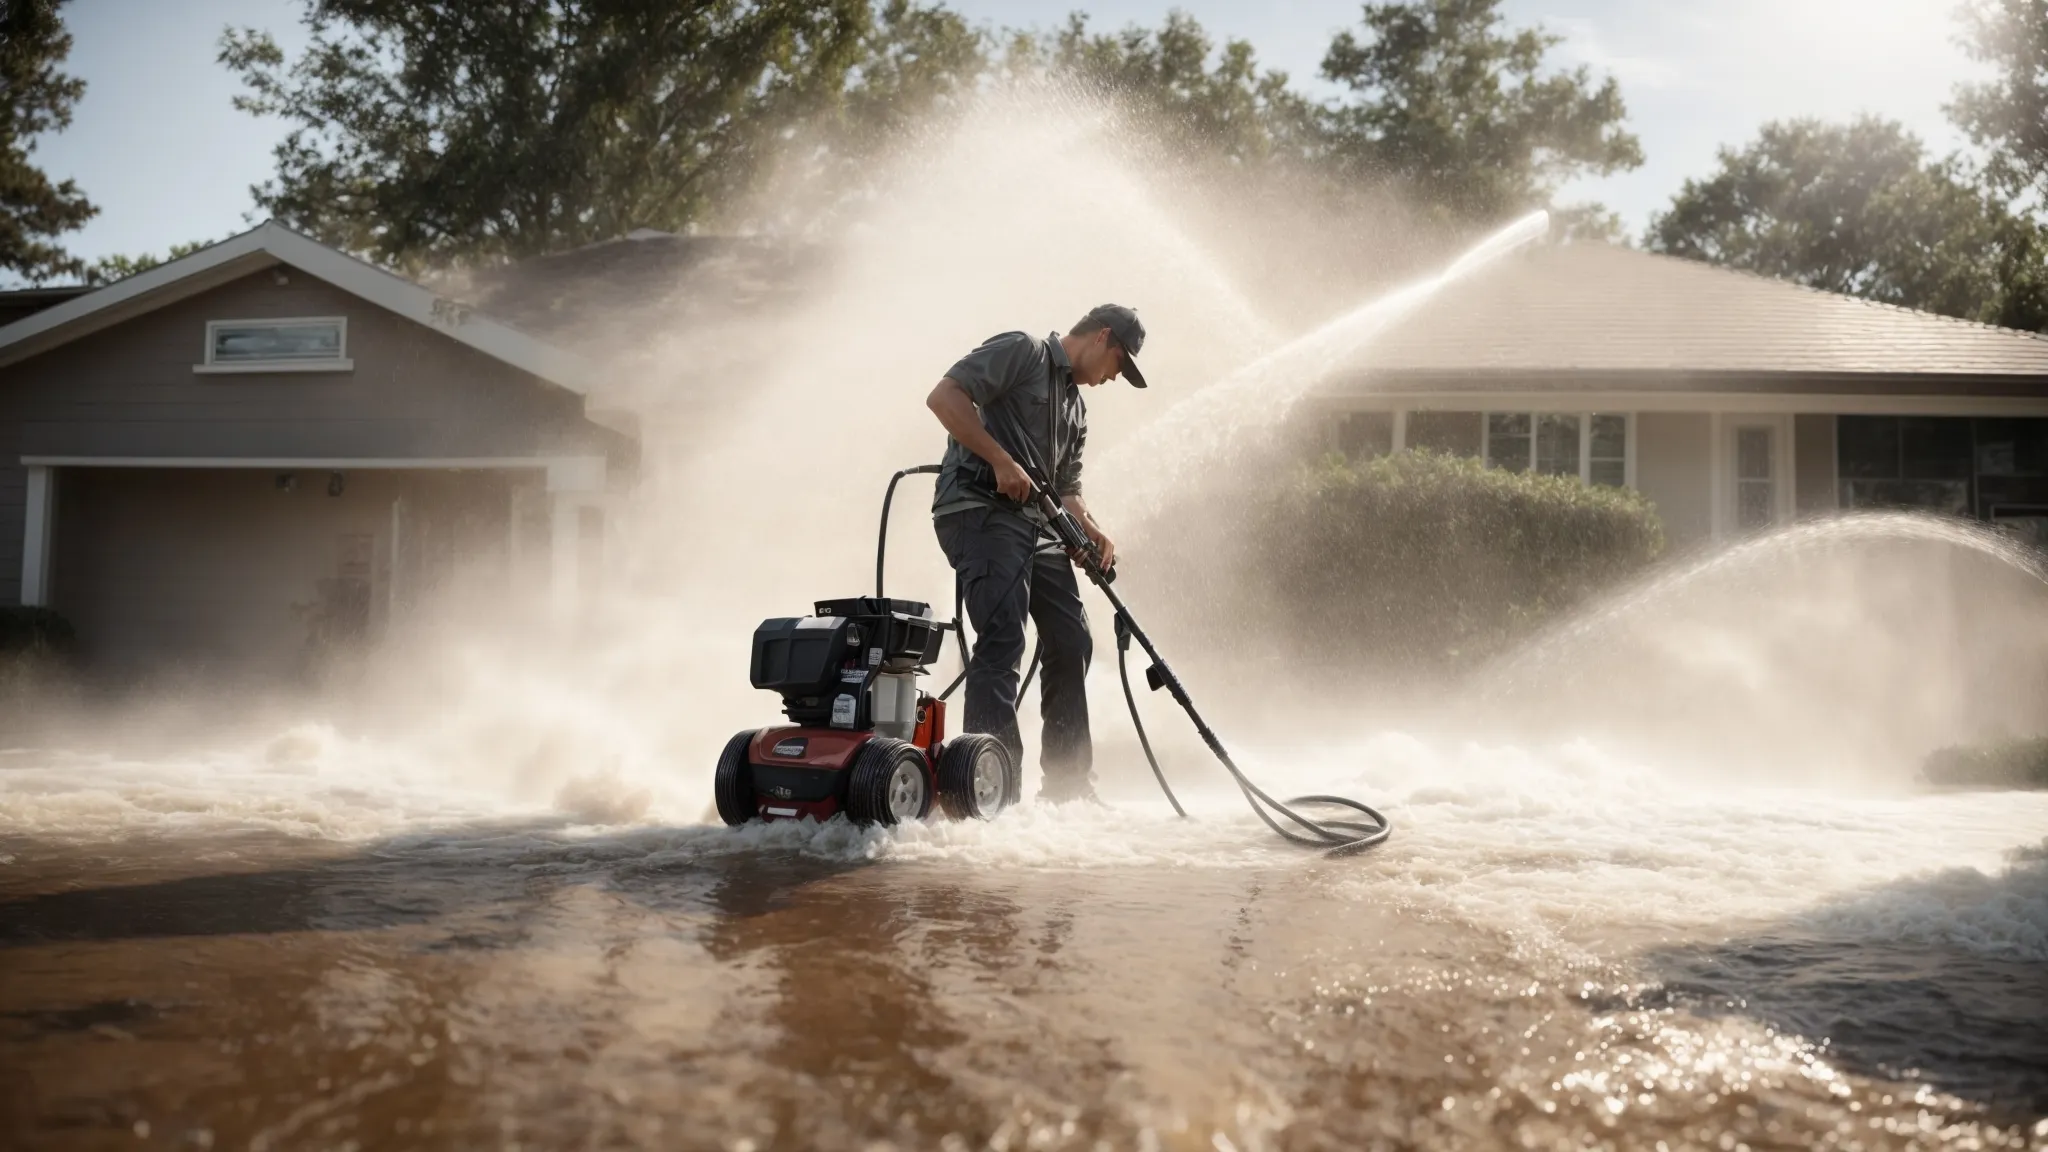 a professional wielding a high-pressure washer blasts water across the front of a suburban home, efficiently clearing away dirt and grime.